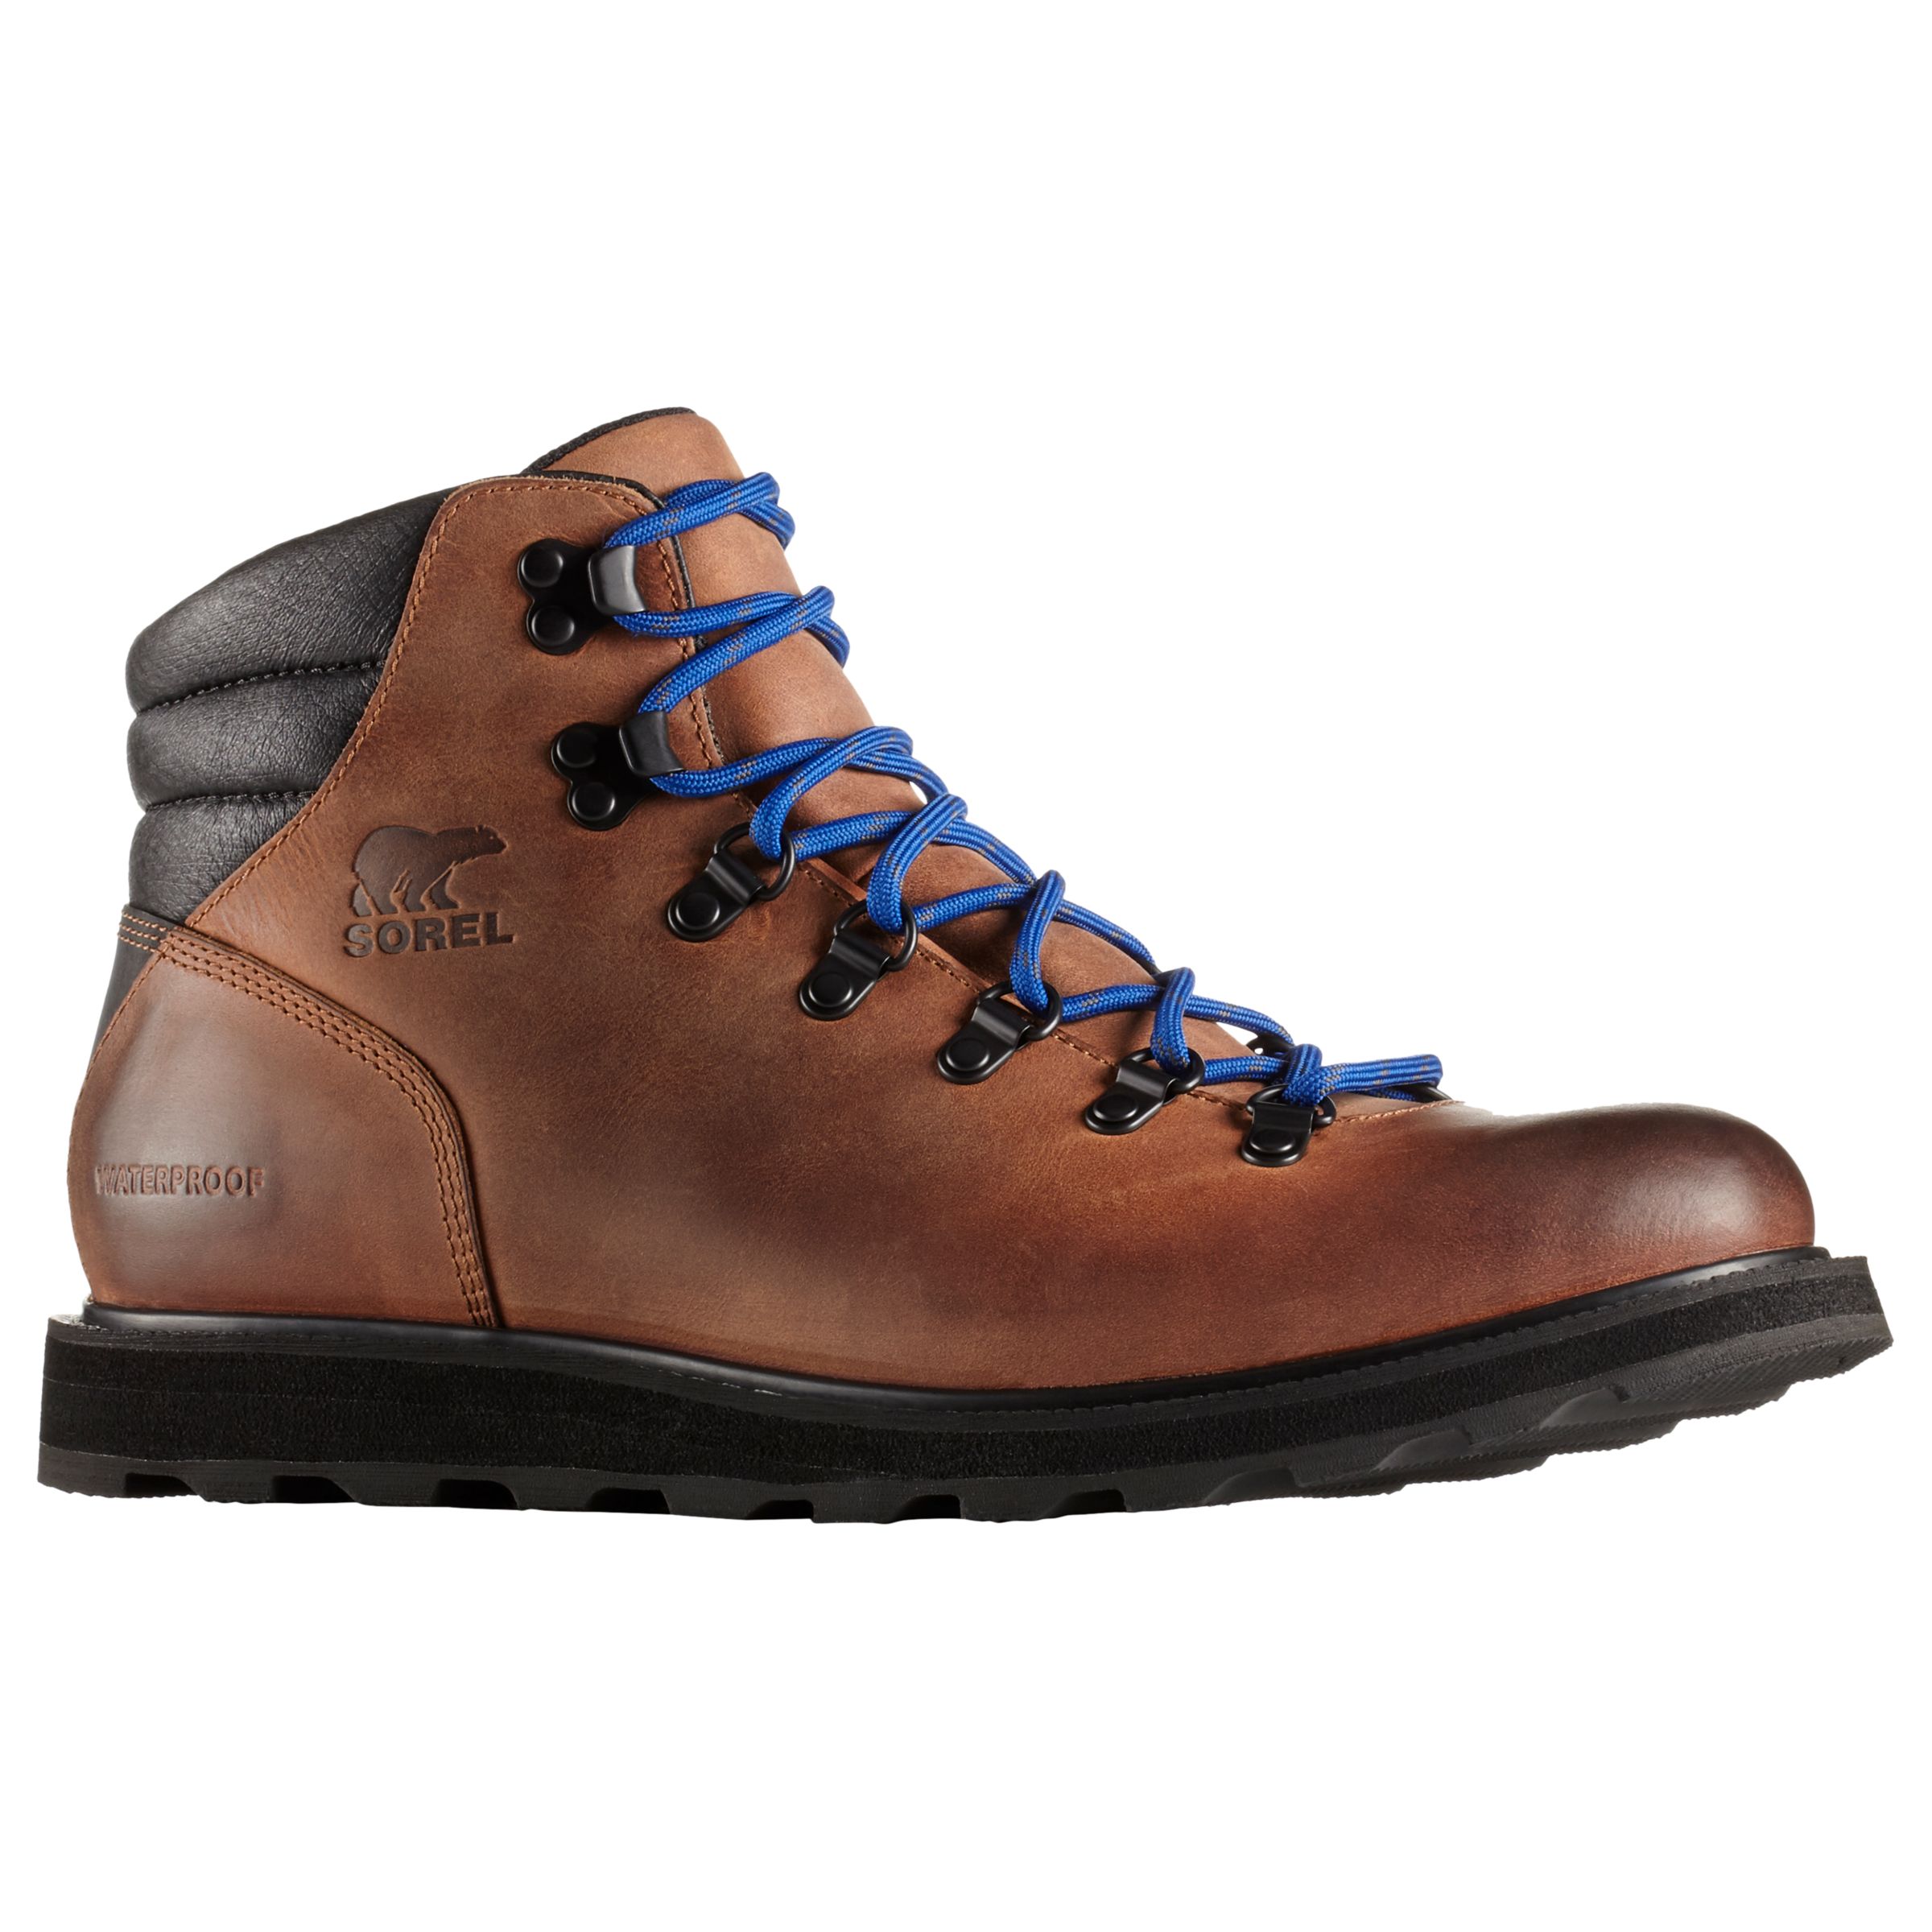 Sorel Madson Leather Men's Hiking Boots 